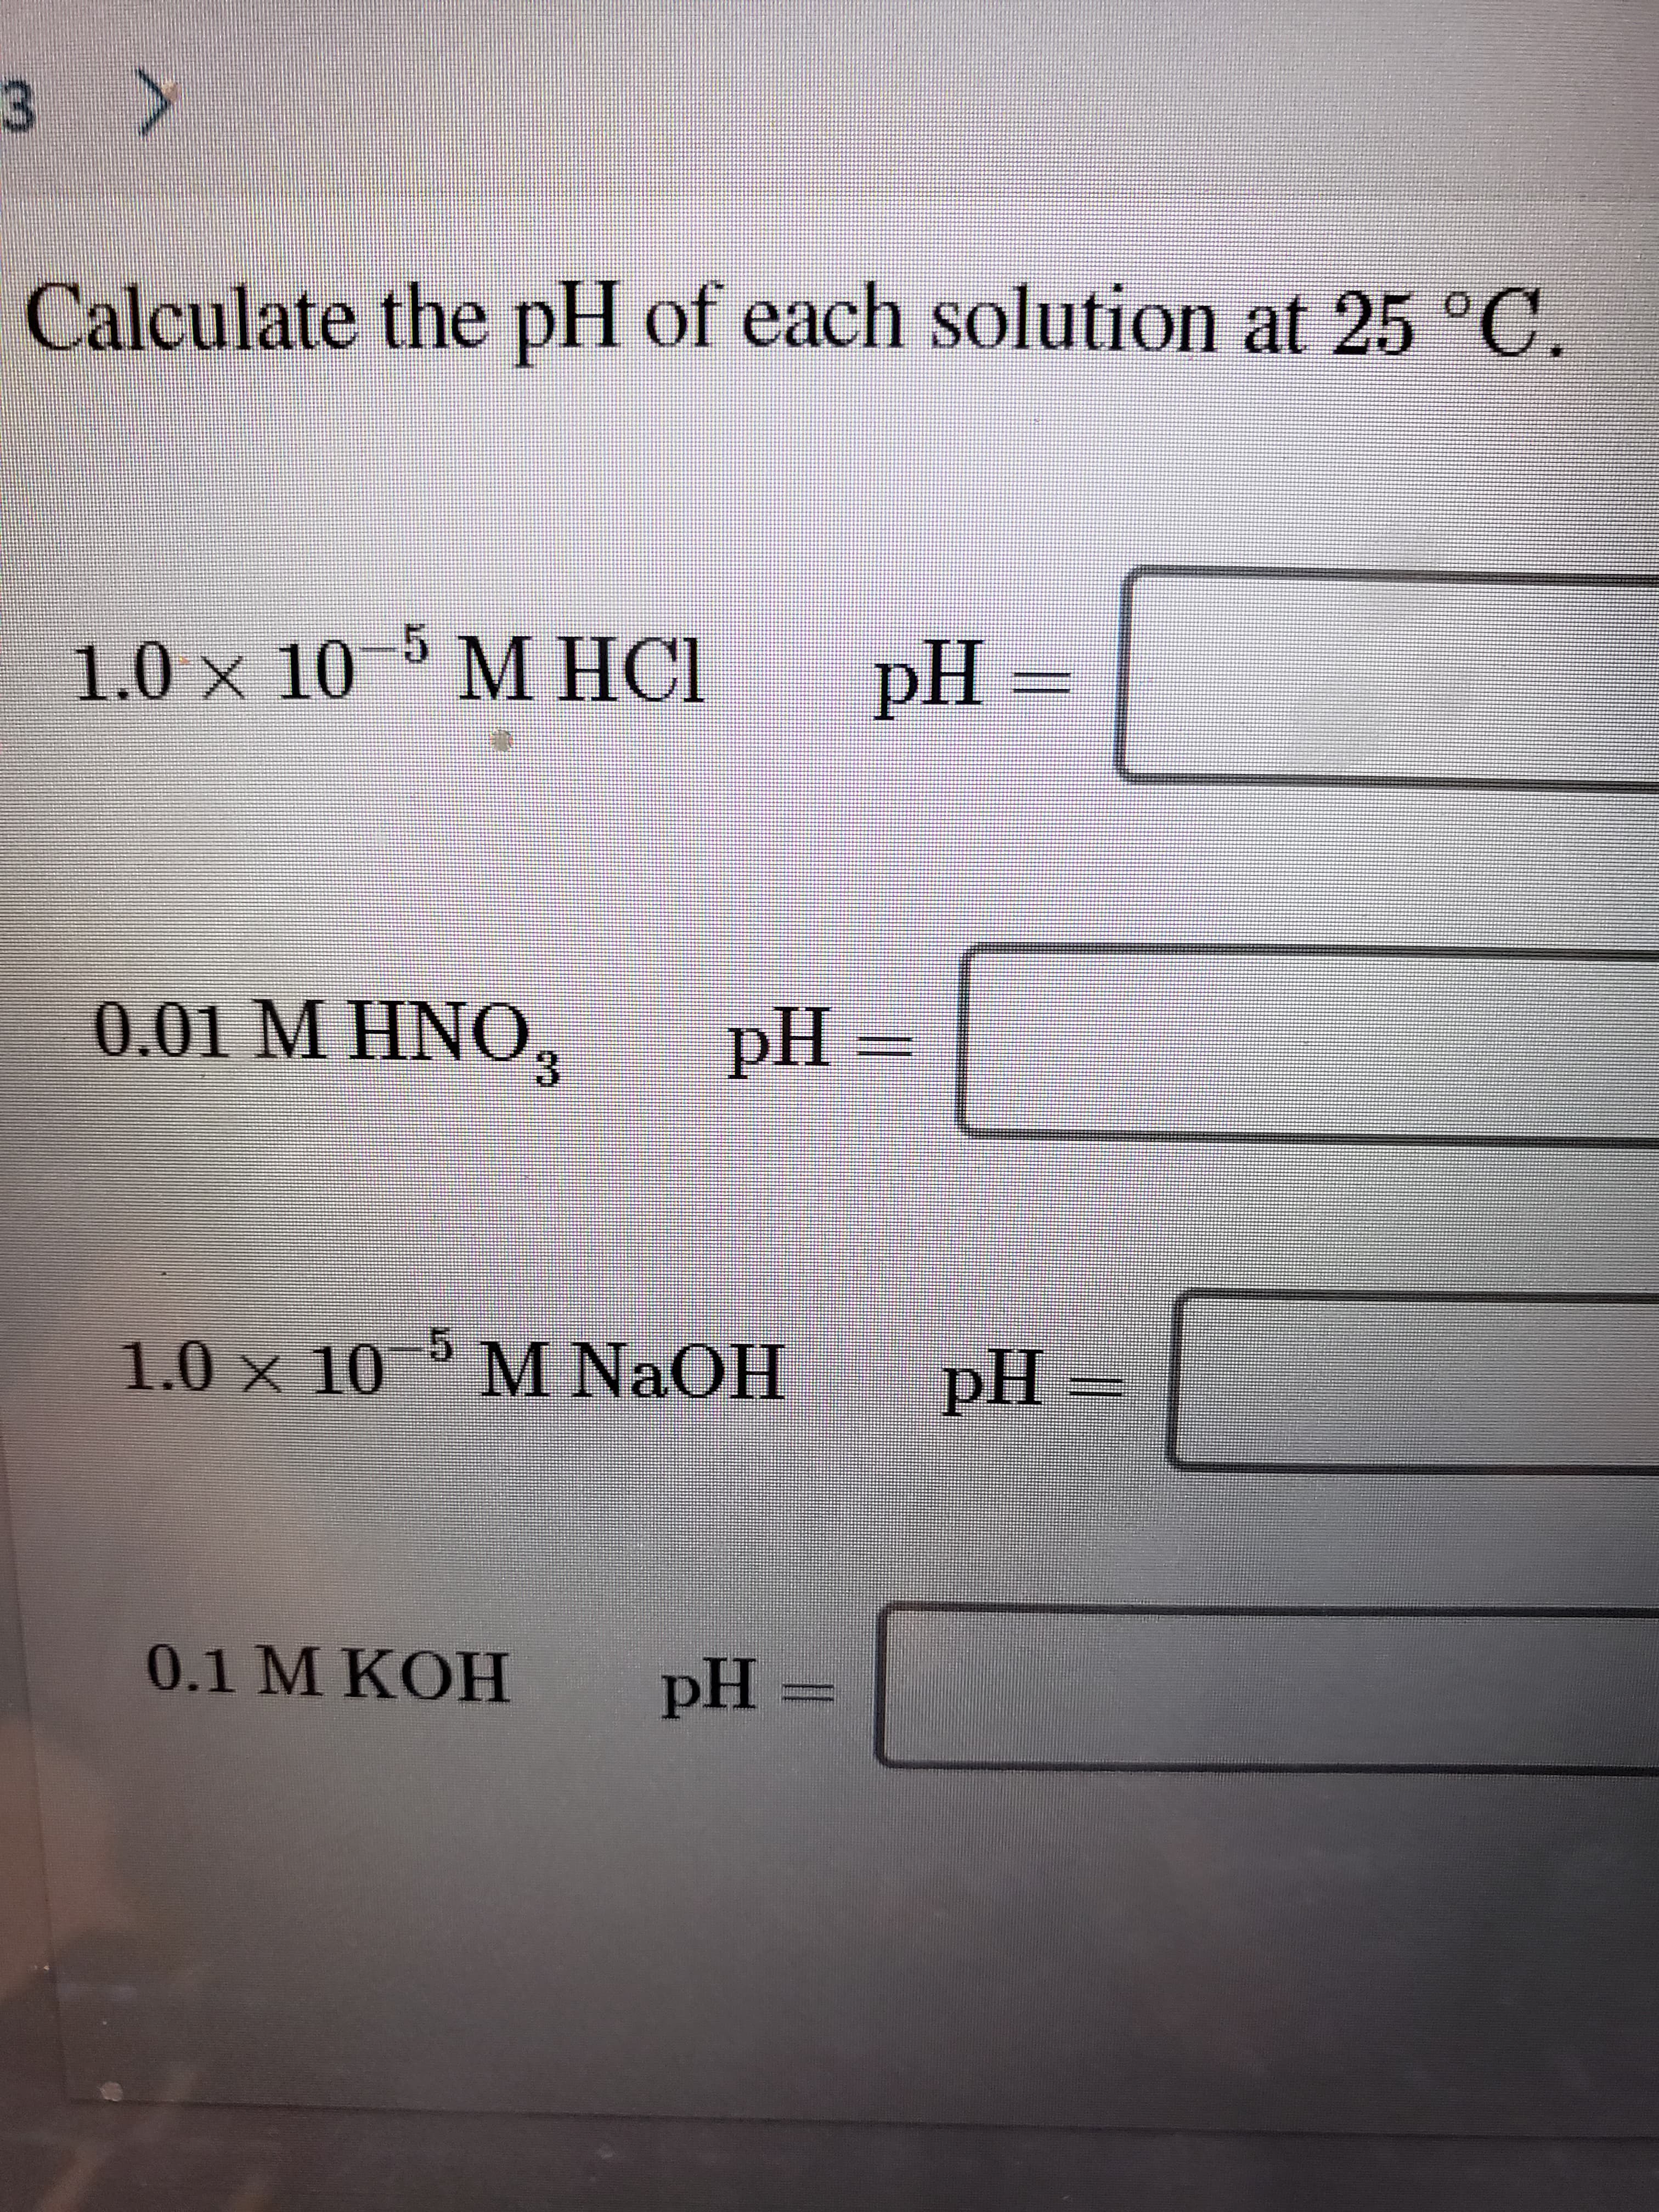 3 >
Calculate the pH of each solution at 25 °C.
5 М НСI
1.0 × 10
M HCI
pH =
0.01 M HNO,
pH=
3.
1.0 x 10 M NaOH
pH
0.1 M KOH
pH =
